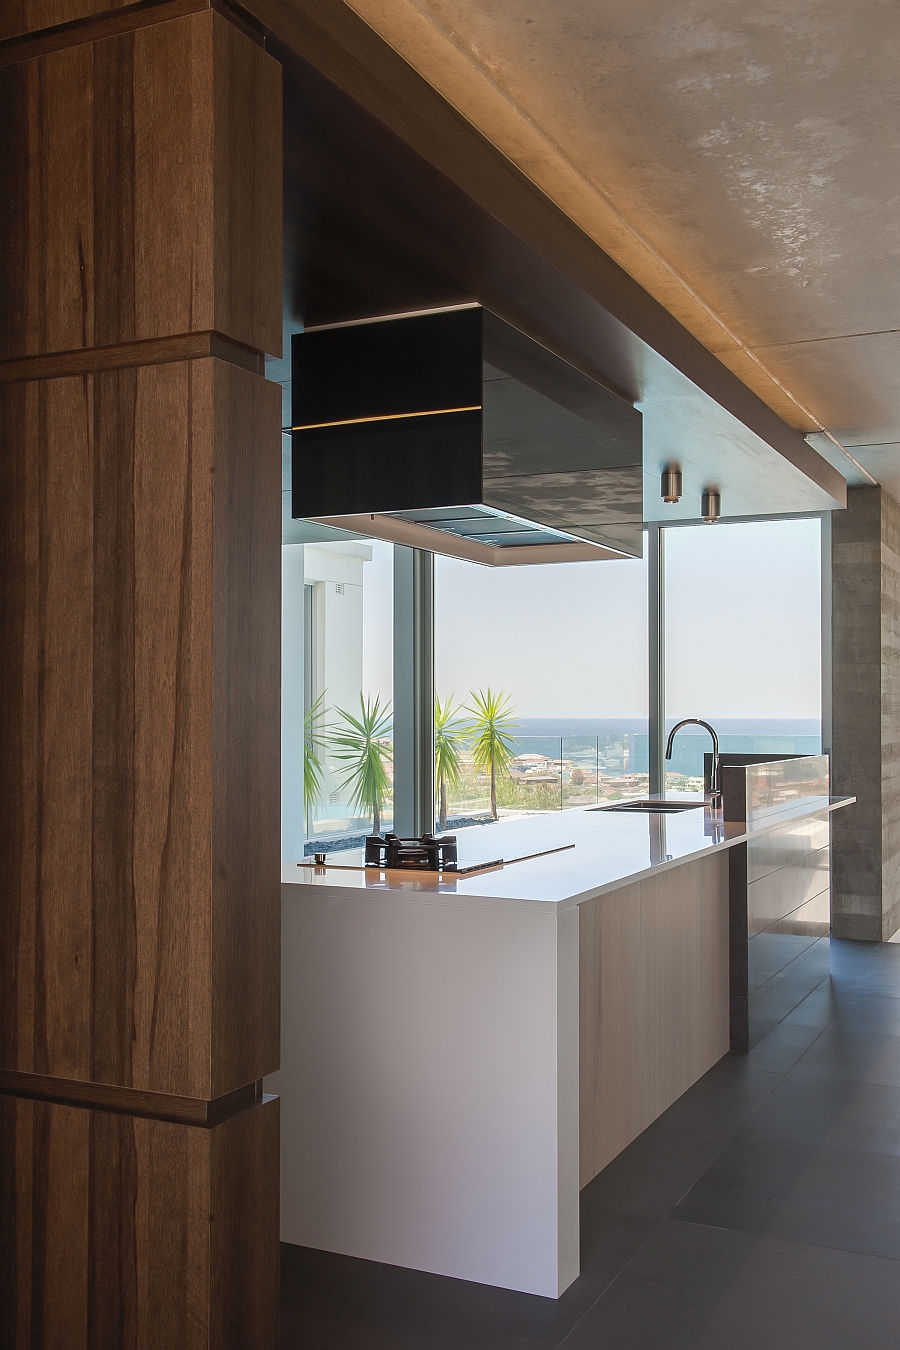 Glass walls offer view of the Bondi beach from the kitchen